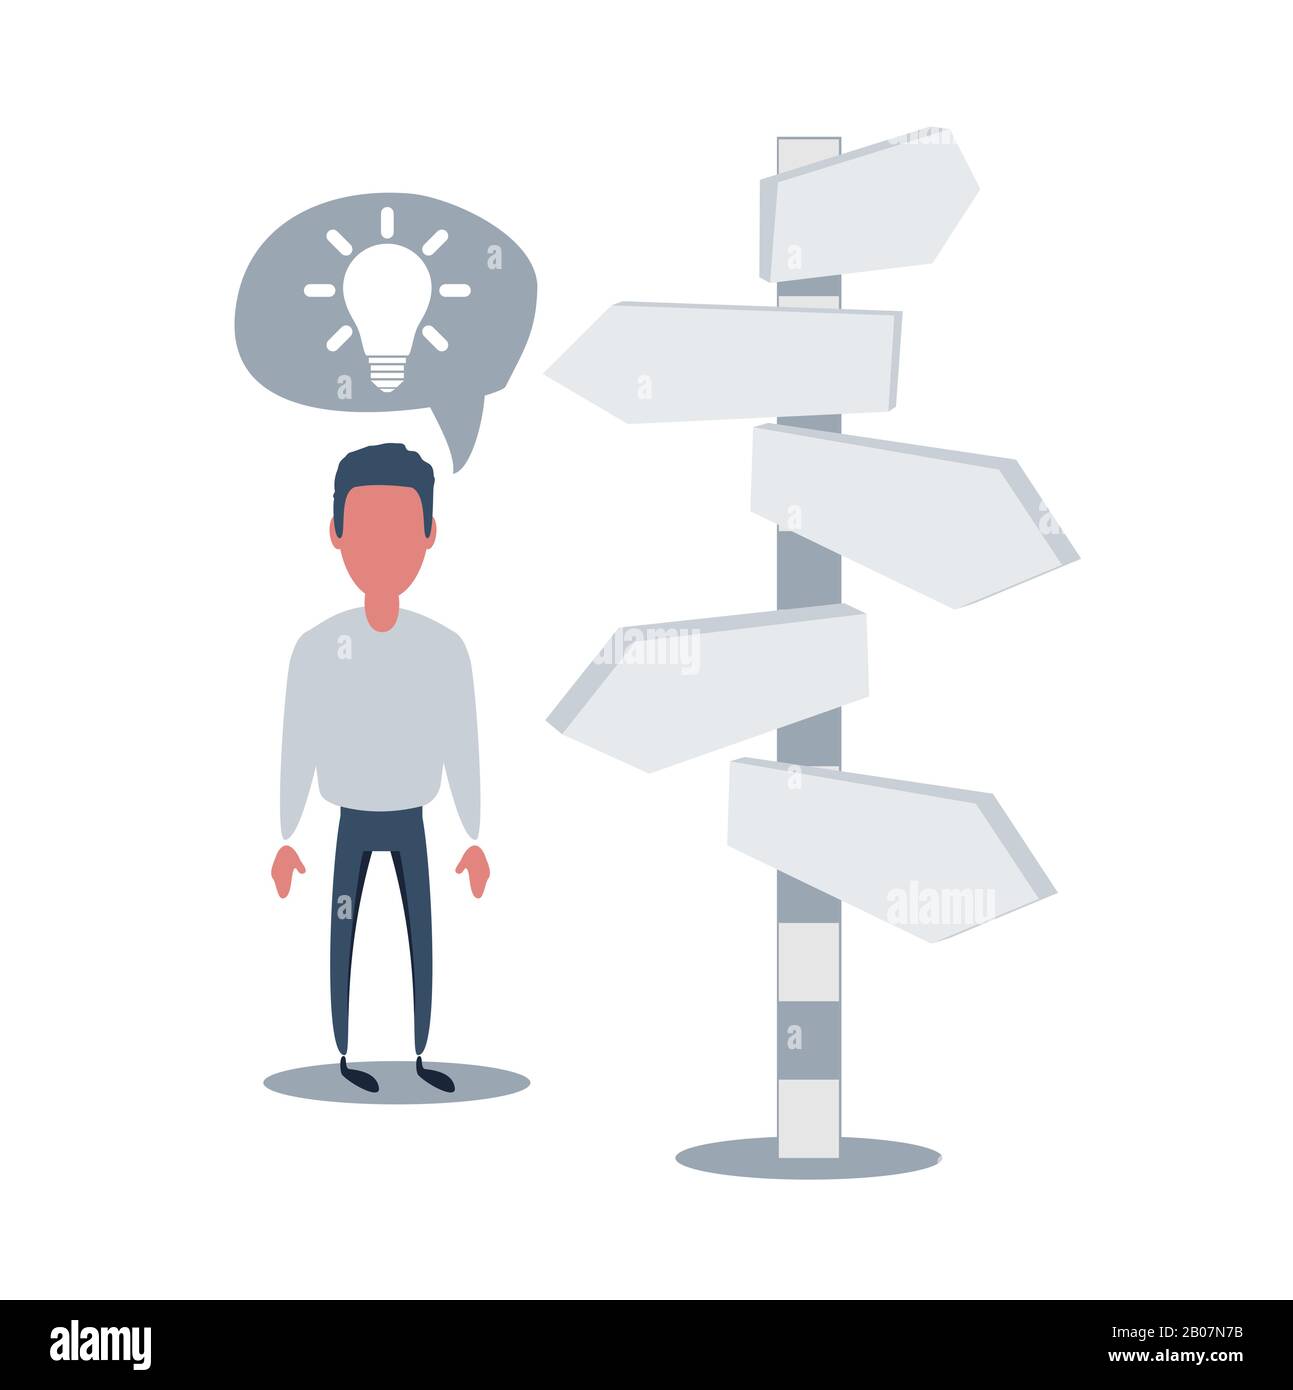 Right direction. A businessman looks at arrows pointing to many directions. Stock Vector